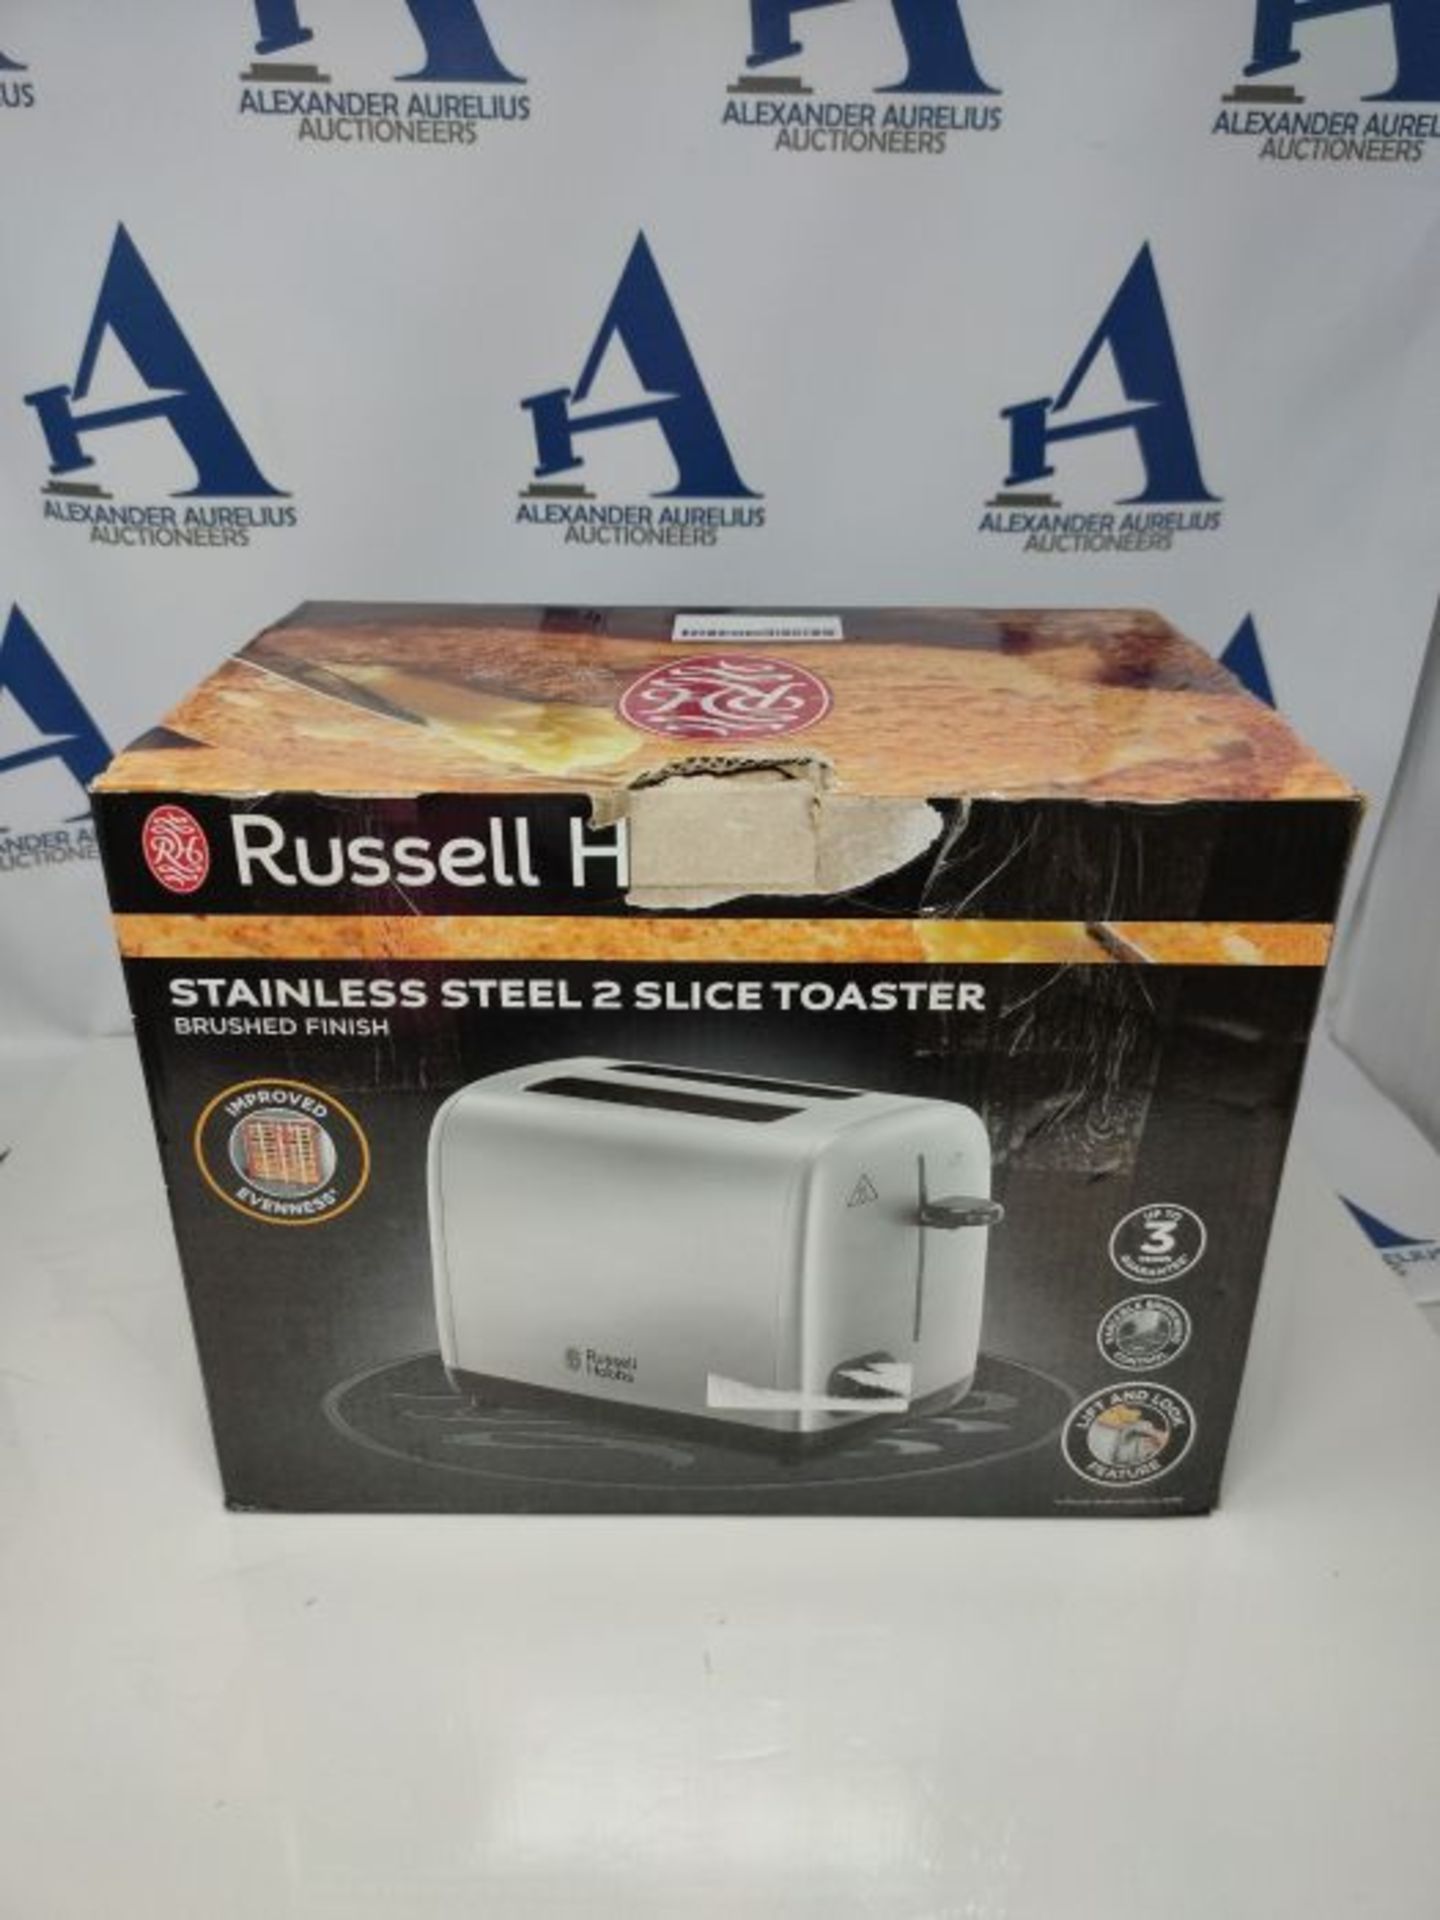 Russell Hobbs 24081 Two Slice Toaster, Brushed Stainless Steel - Image 2 of 3